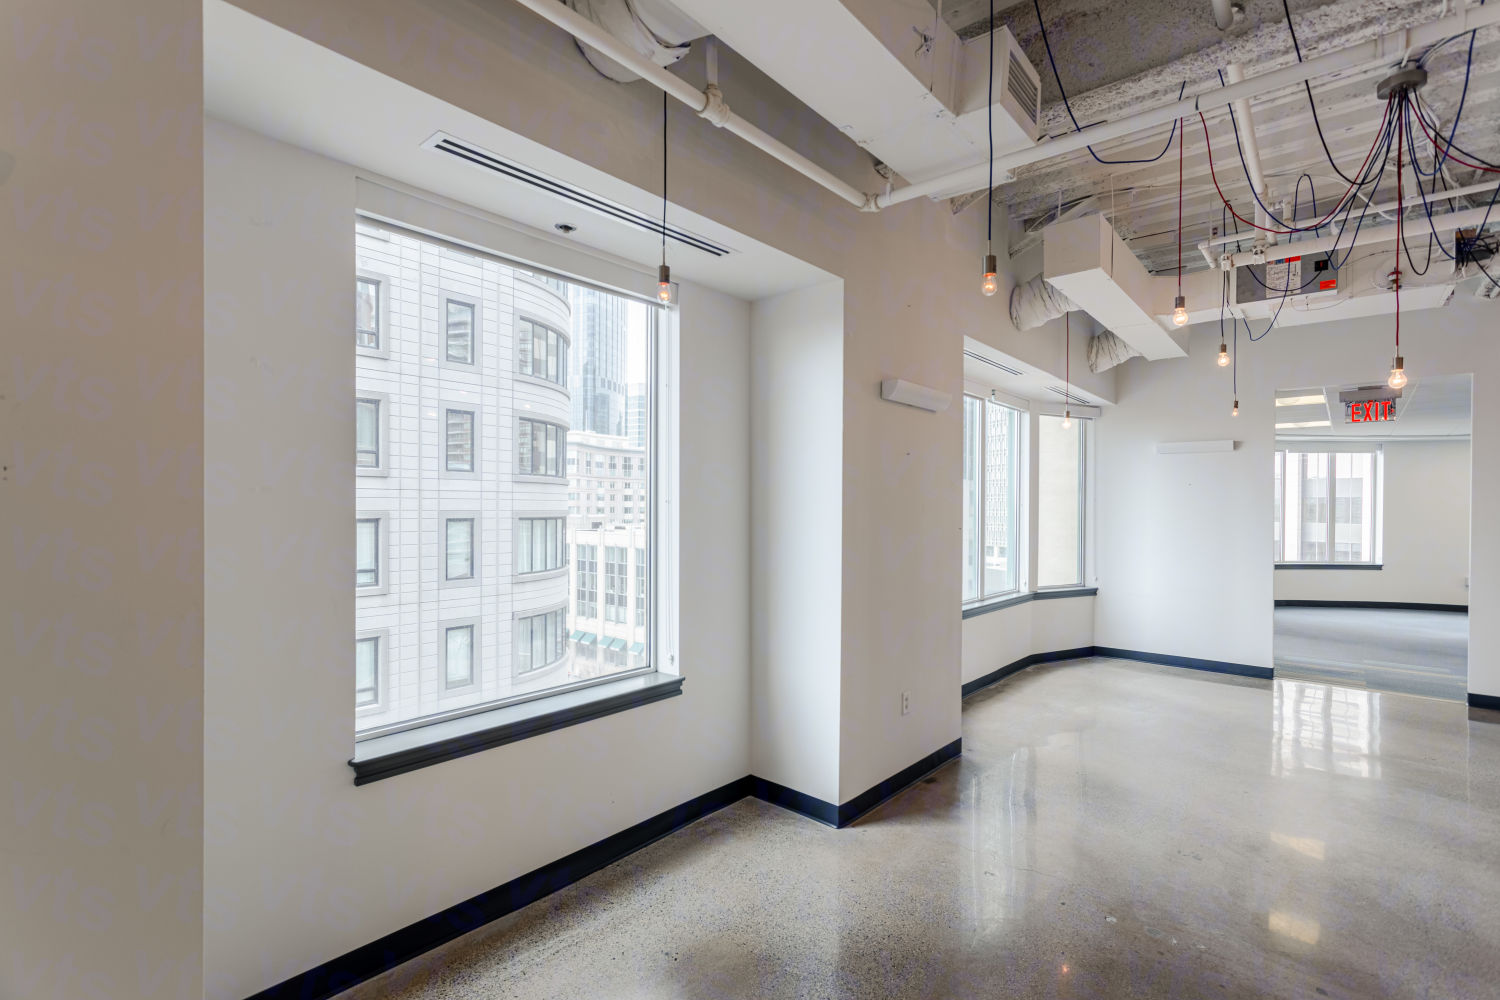 116 Huntington Avenue, Boston, MA Commercial Space for Rent